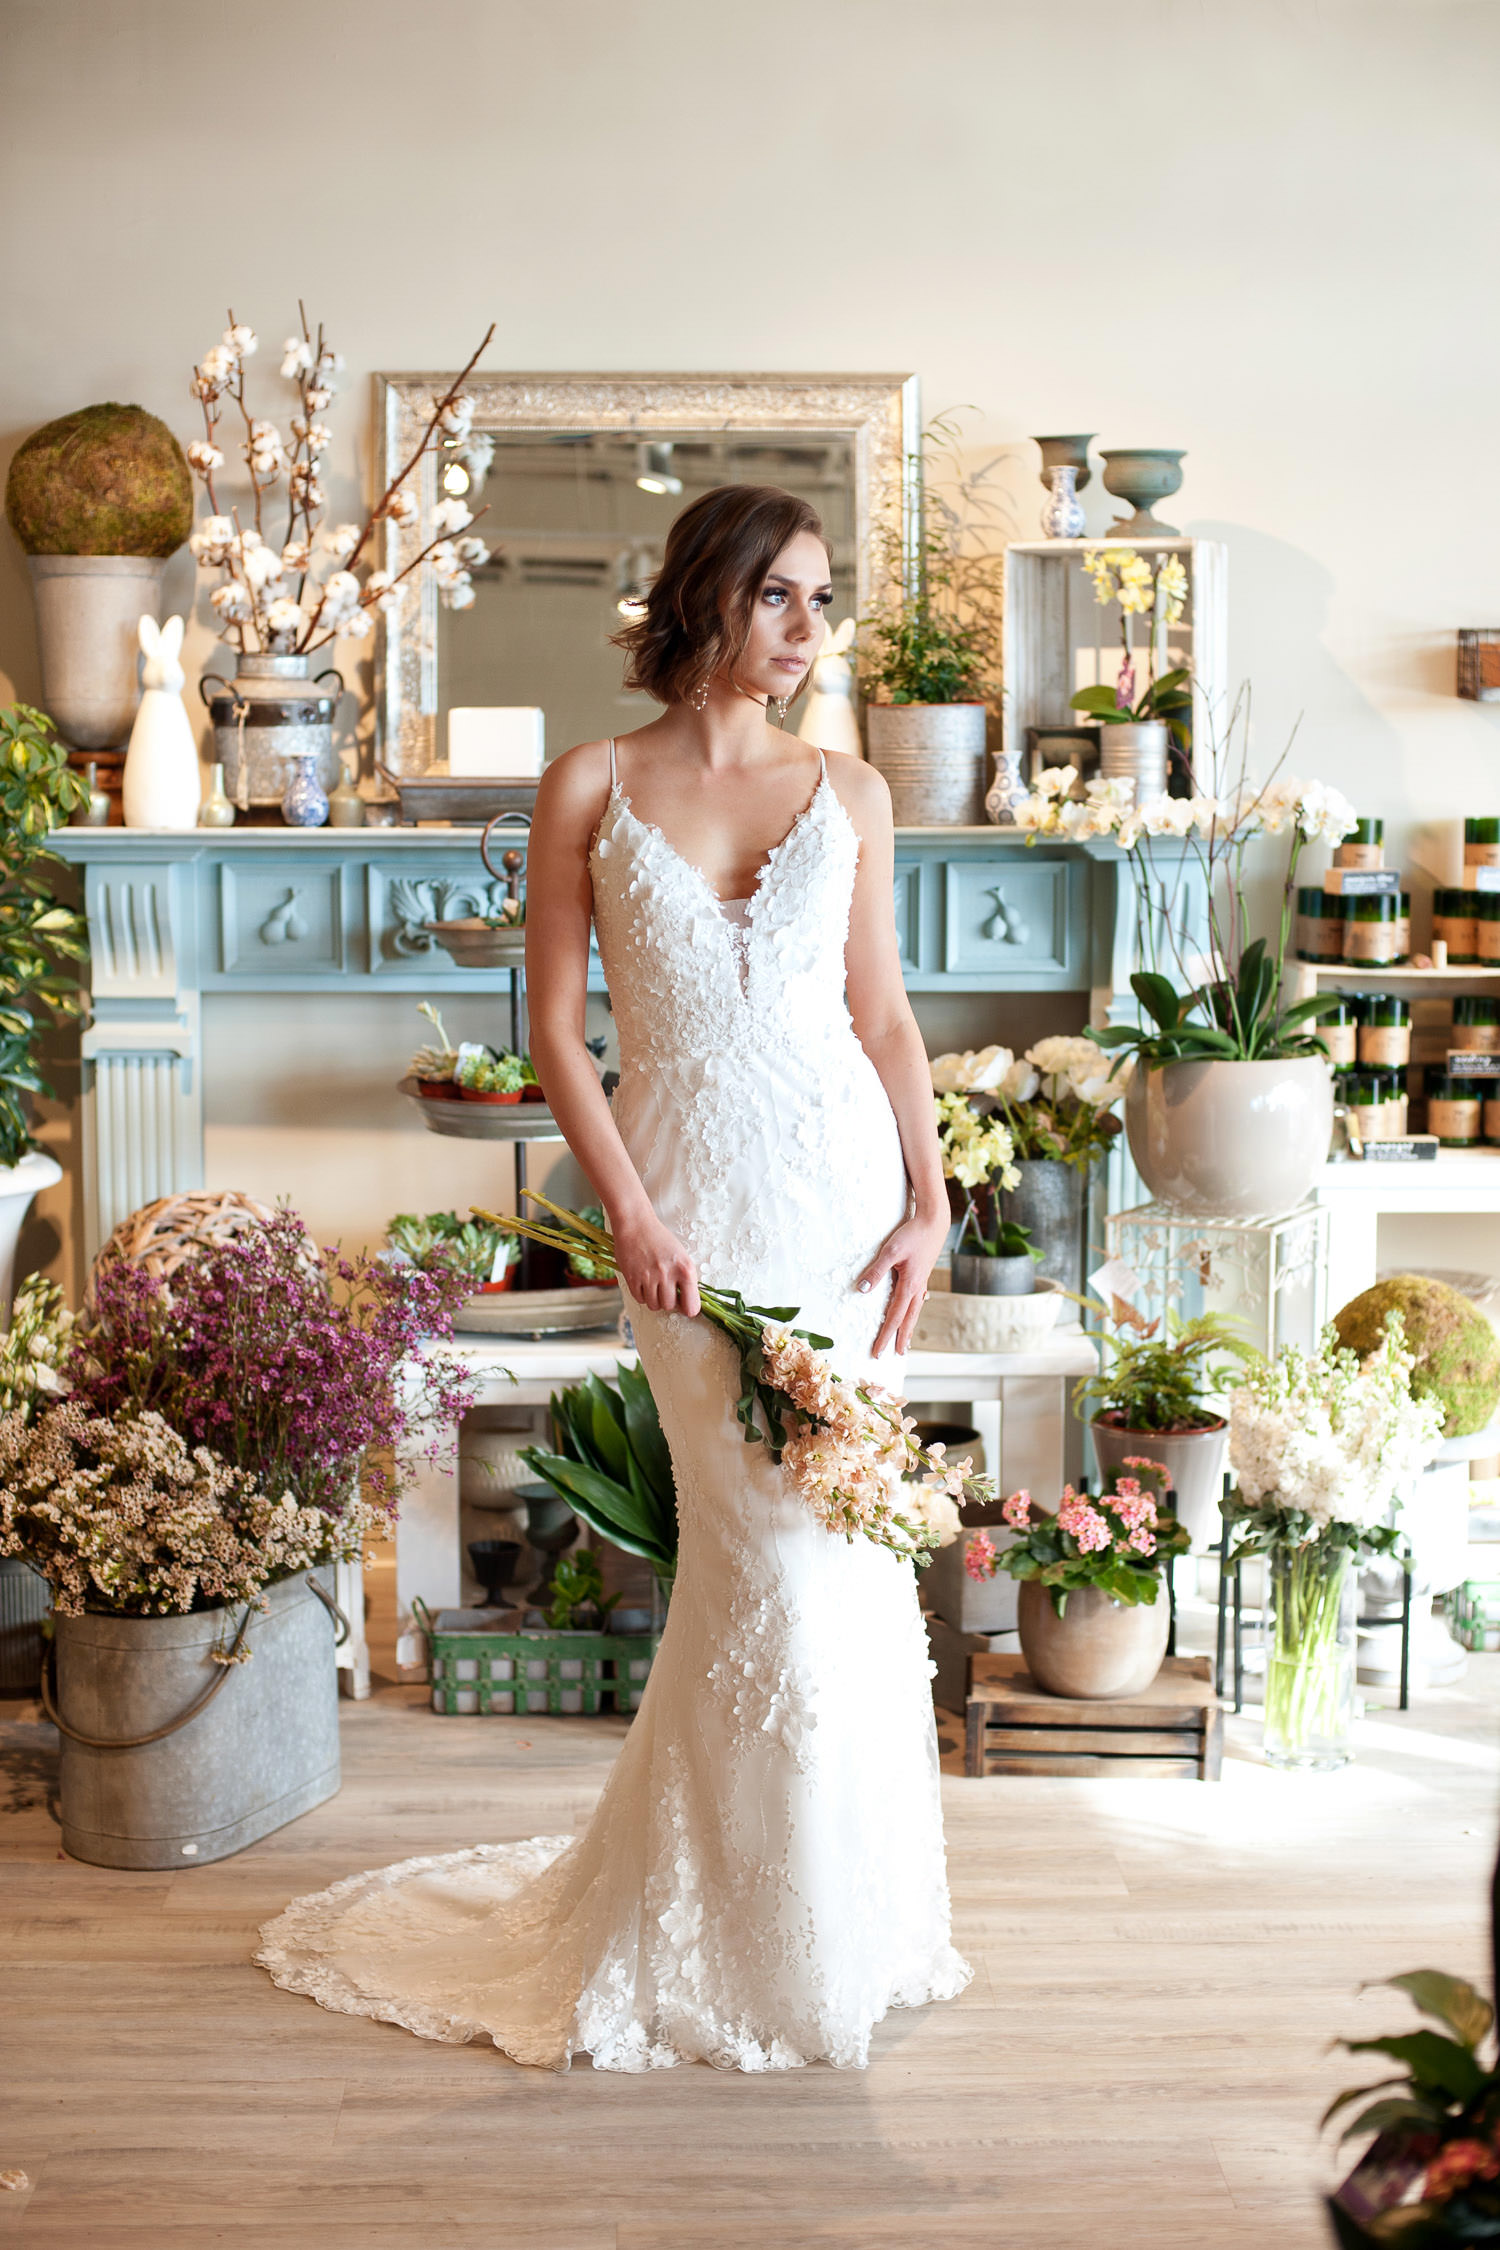 bride wears a floral lace gown from Lis Simon captured by Tara Whittaker Photography